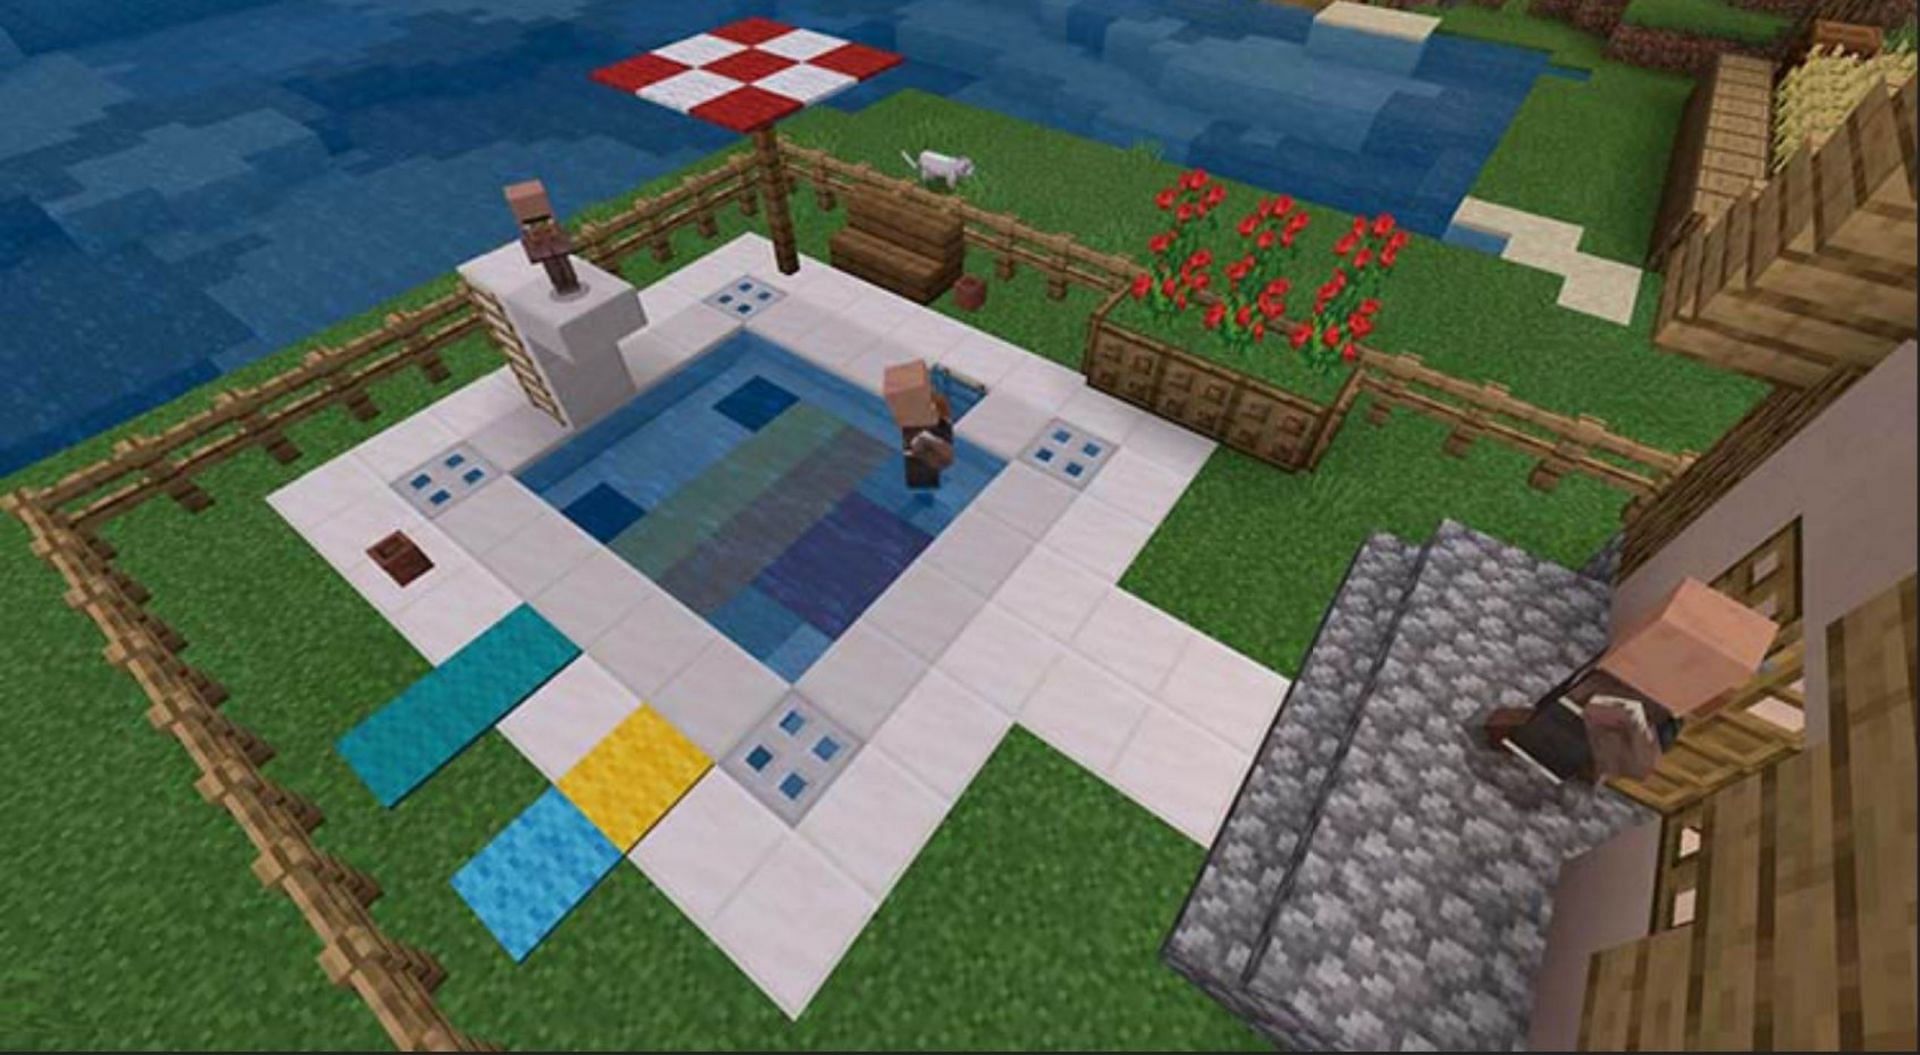 Swimming pools can benefit significantly from quartz or white concrete additions (Image via Mojang)